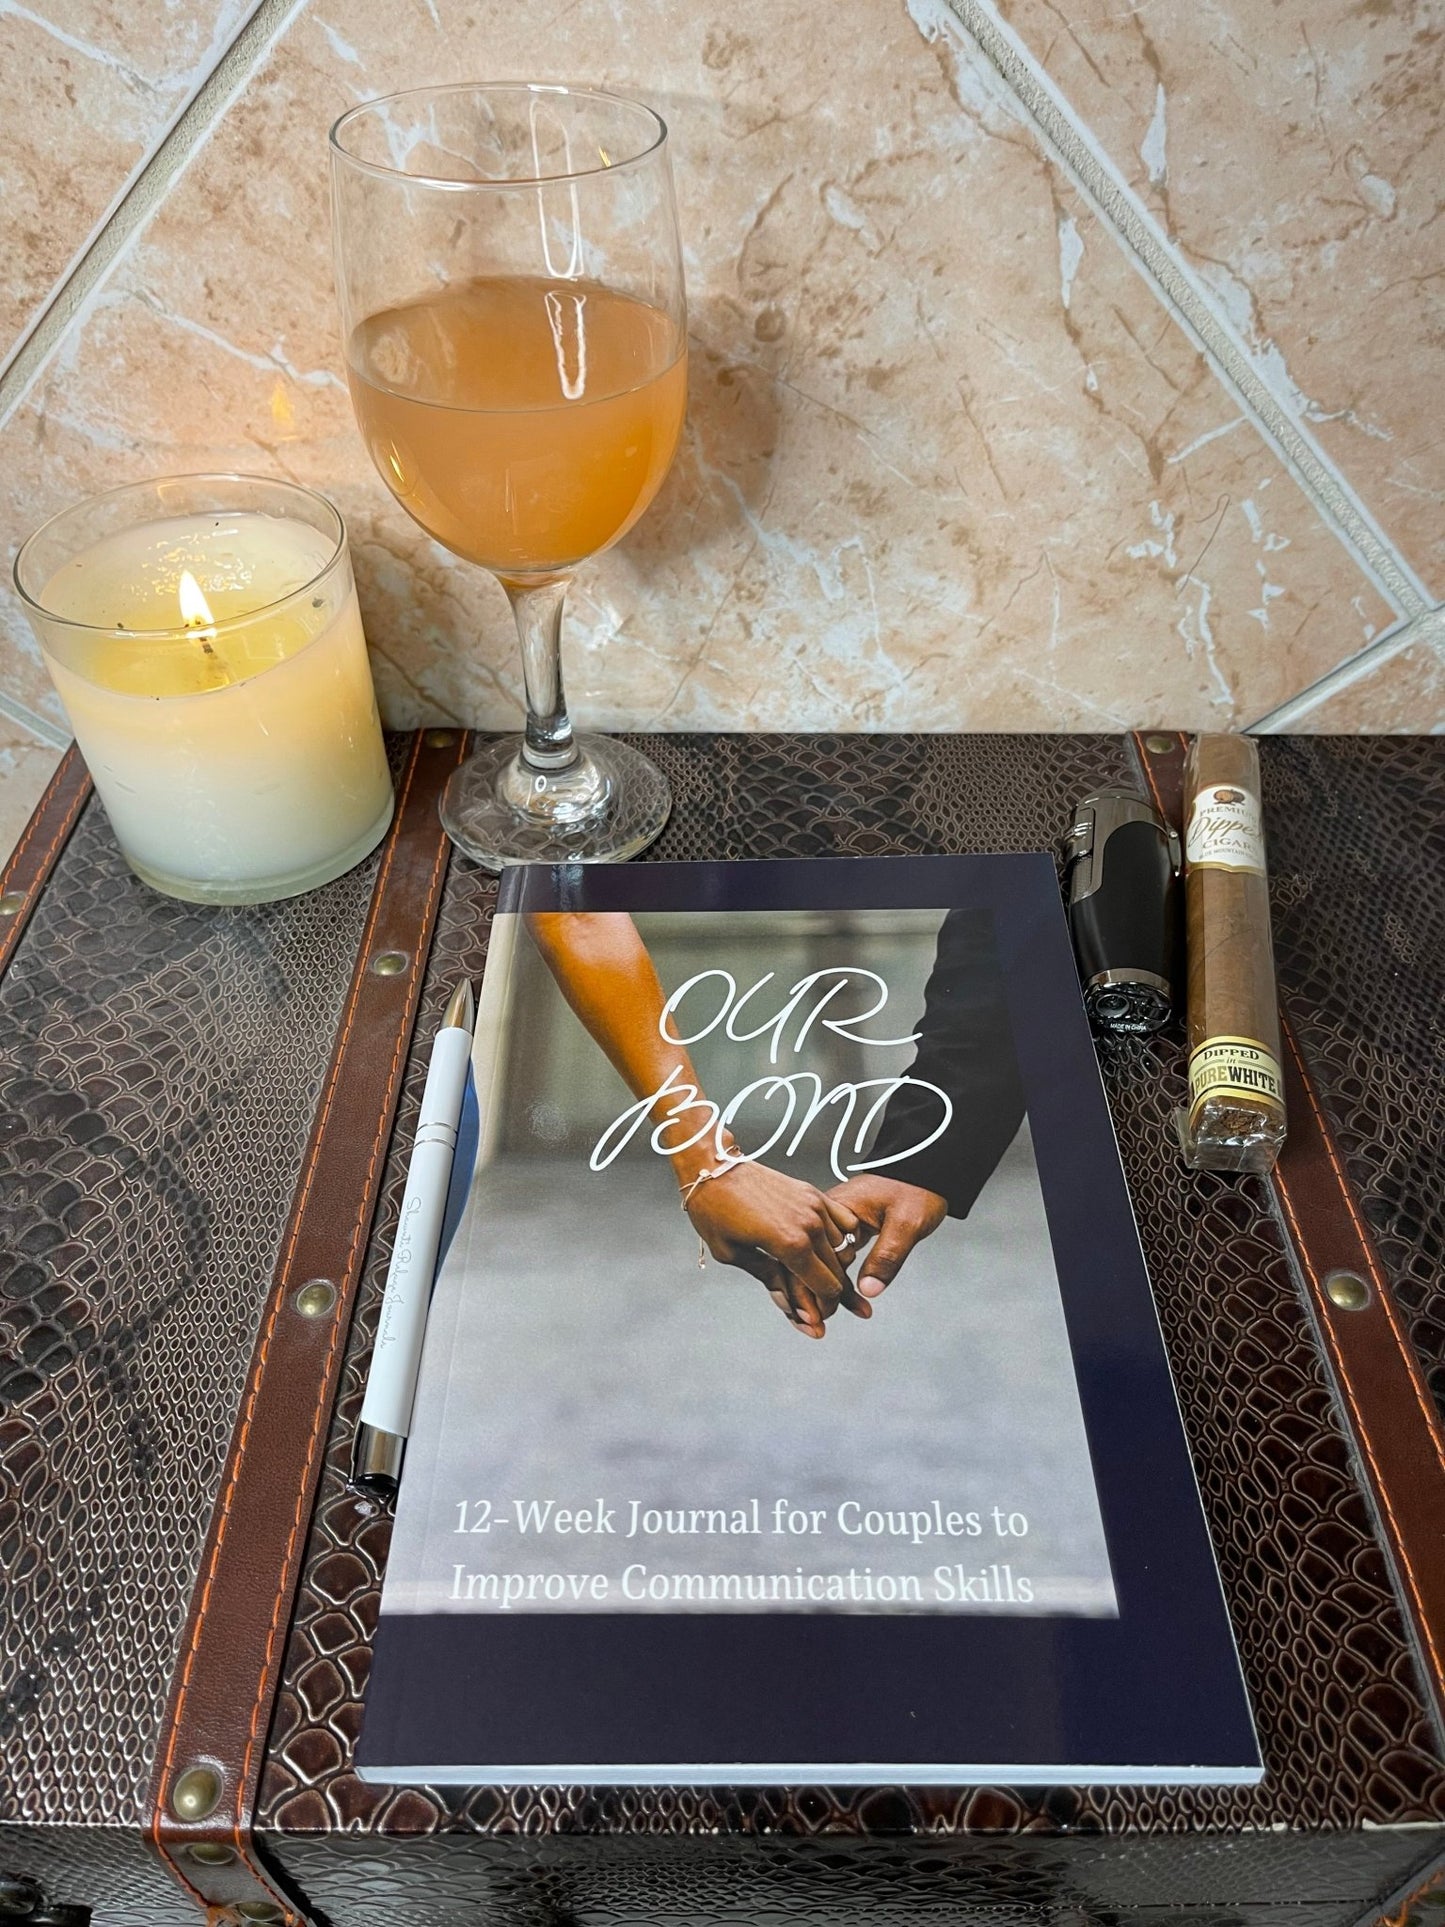 Our Bond: Guided Journal for Couples - Shawnti Refuge Journals